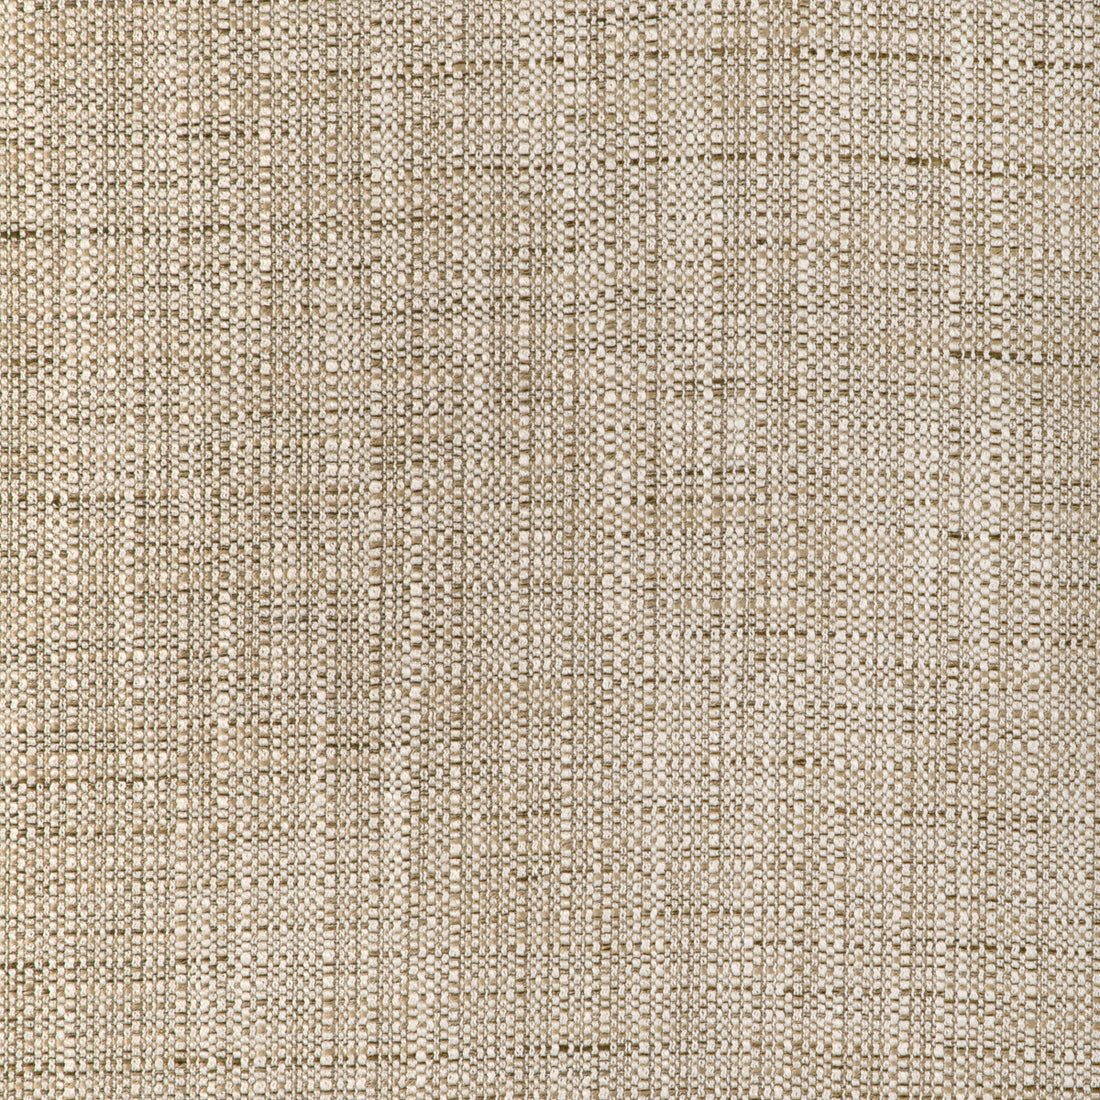 Kravet Design fabric in 37137-16 color - pattern 37137.16.0 - by Kravet Design in the Woven Colors collection